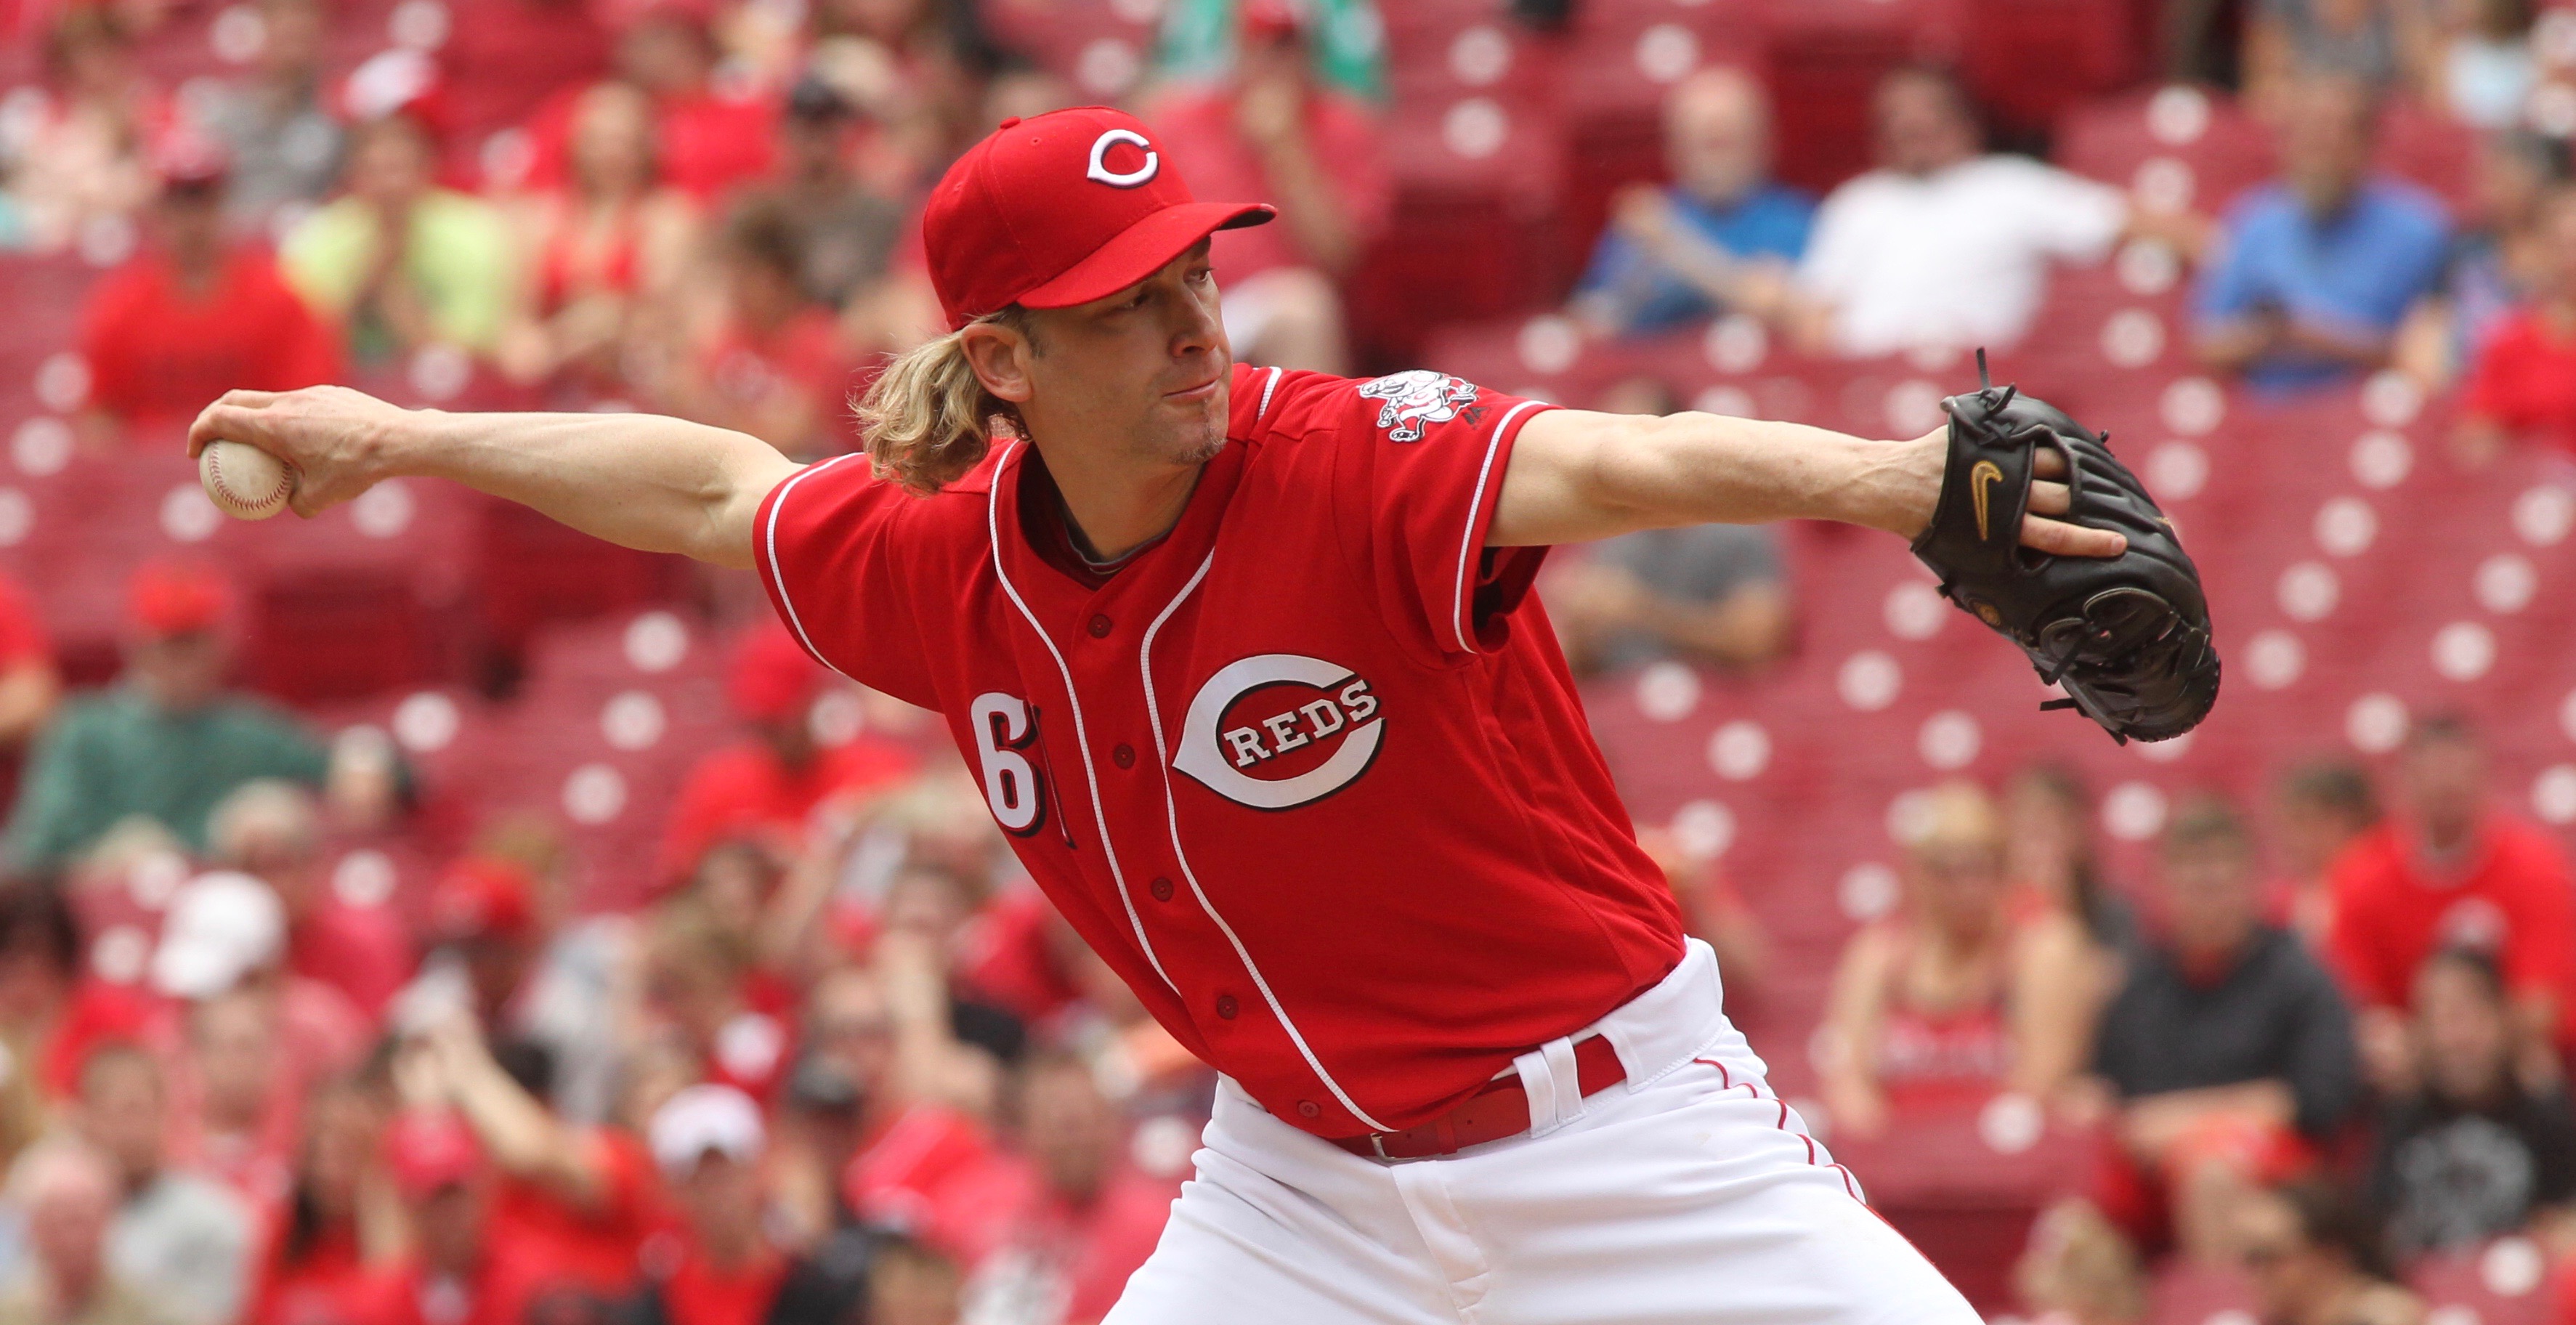 Reds: Bronson Arroyo receives organization's highest honor Hall of